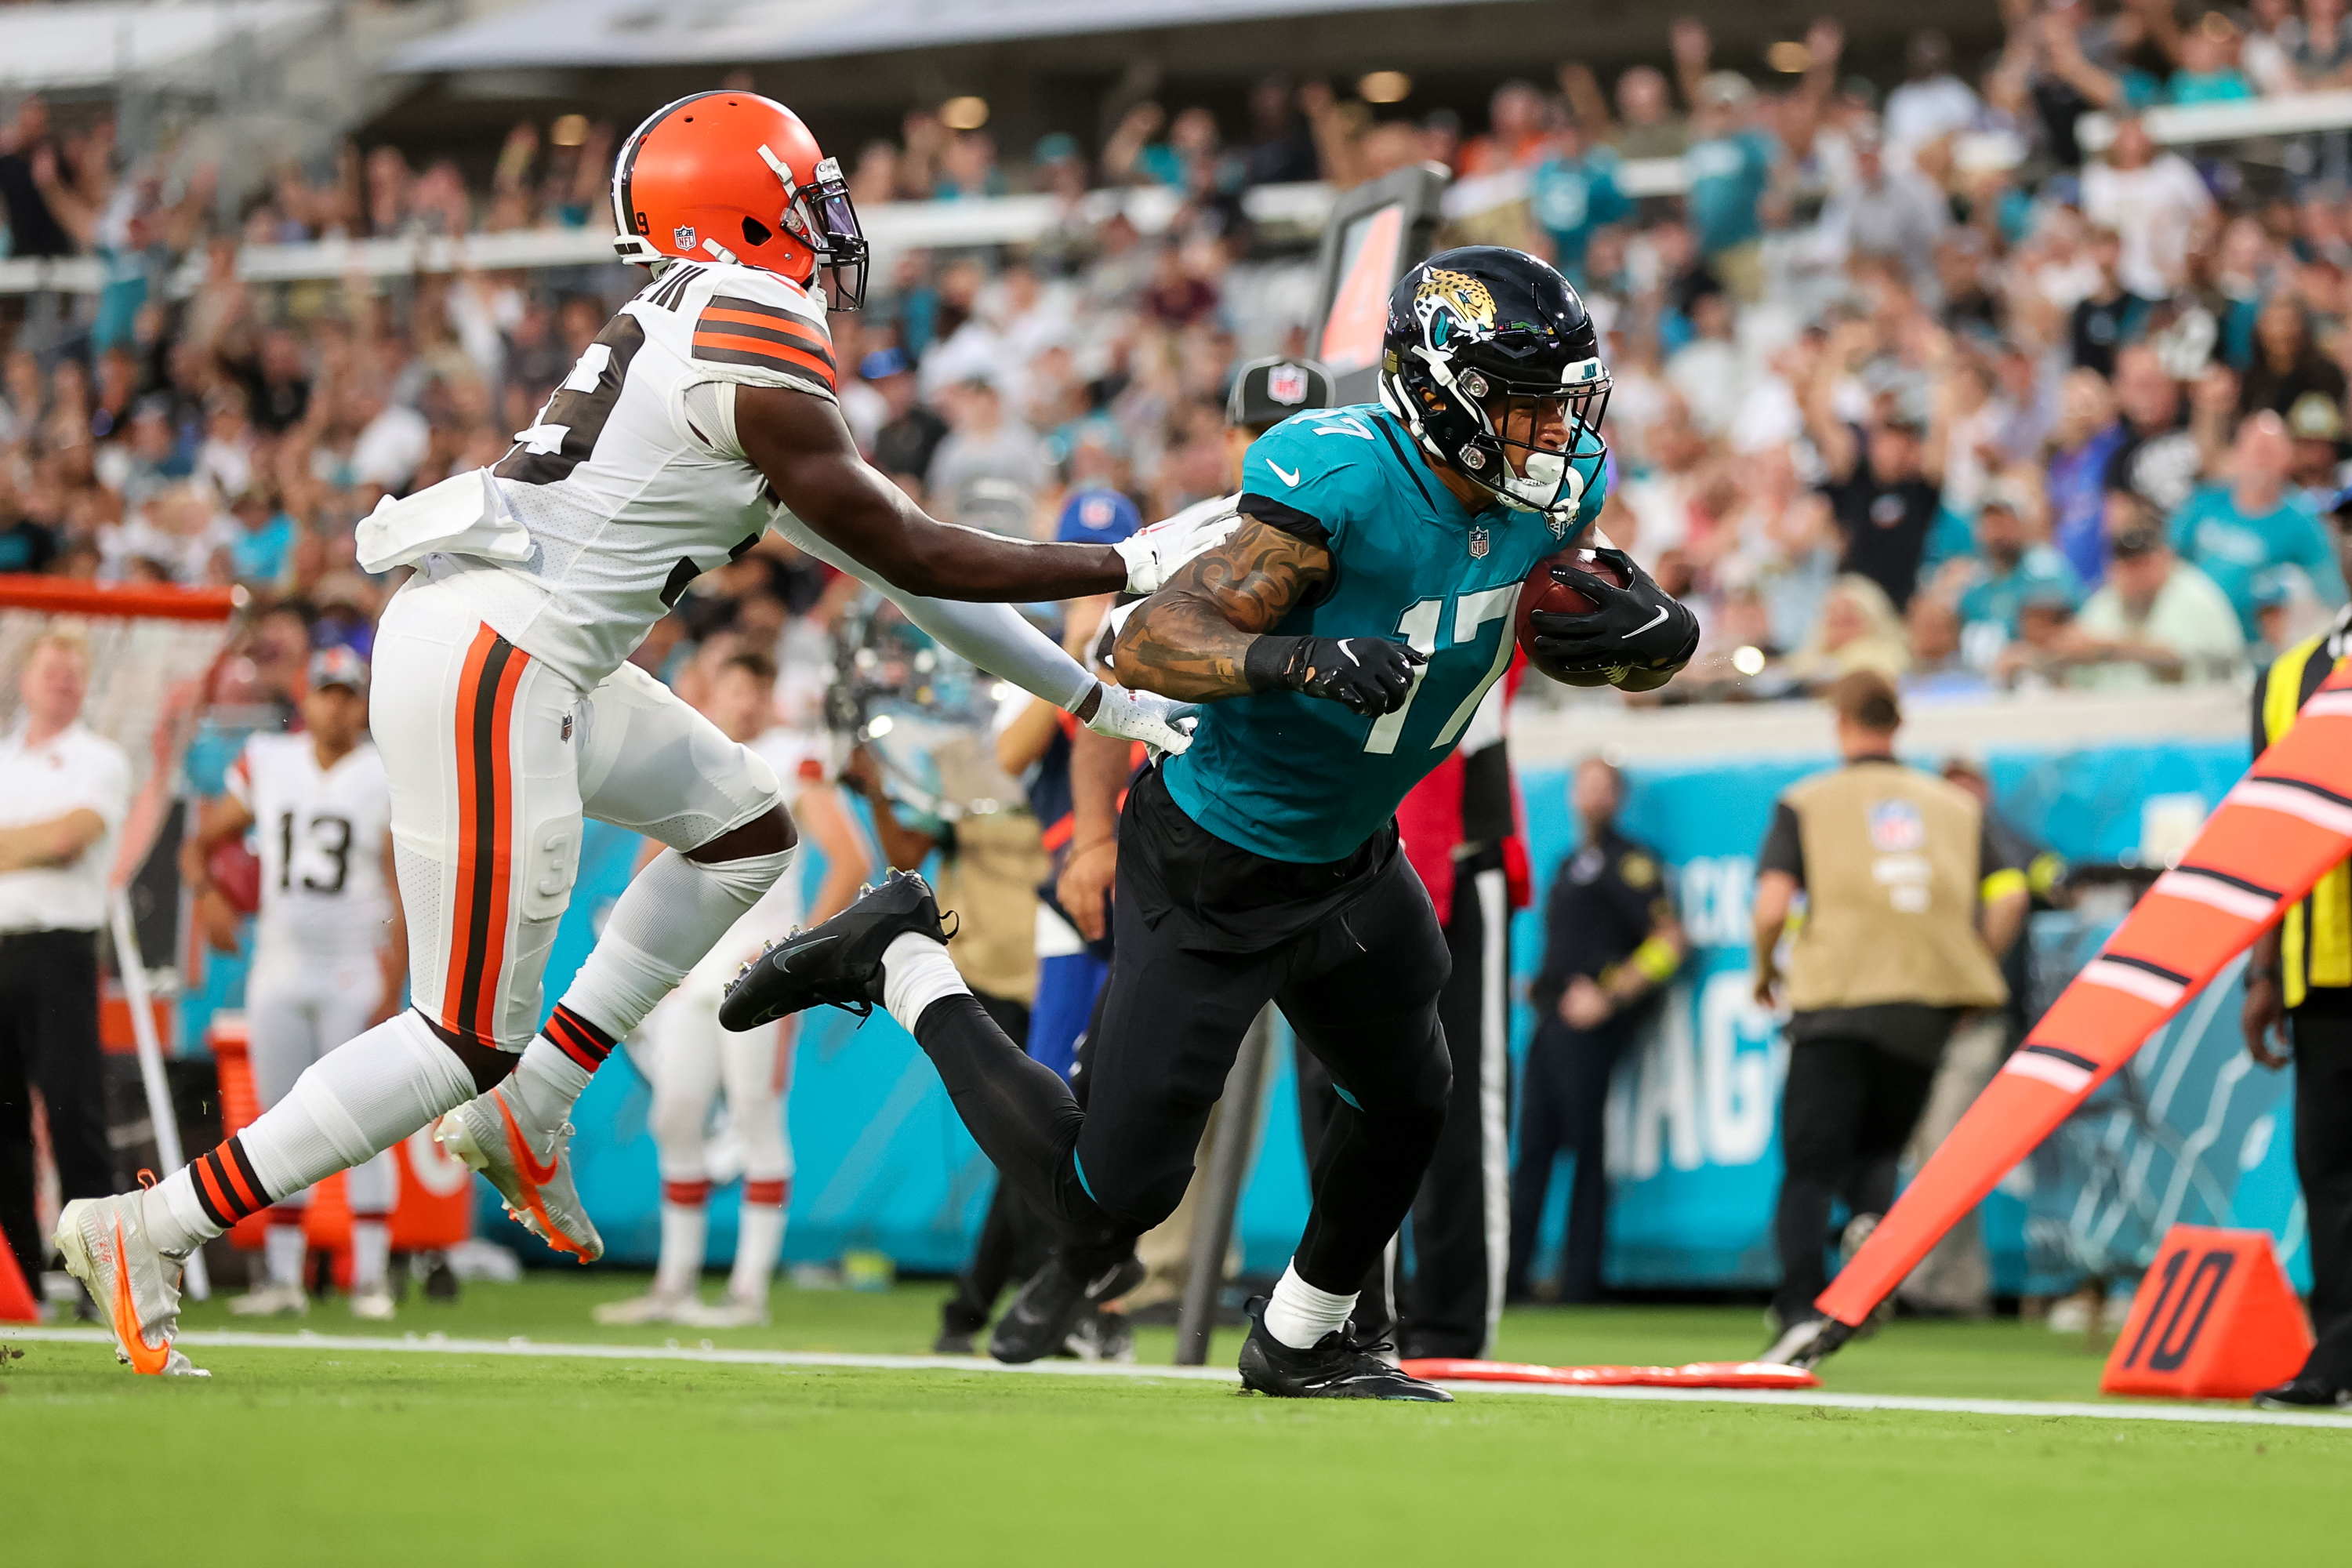 Jaguars' free agent additions make early impression vs. Browns